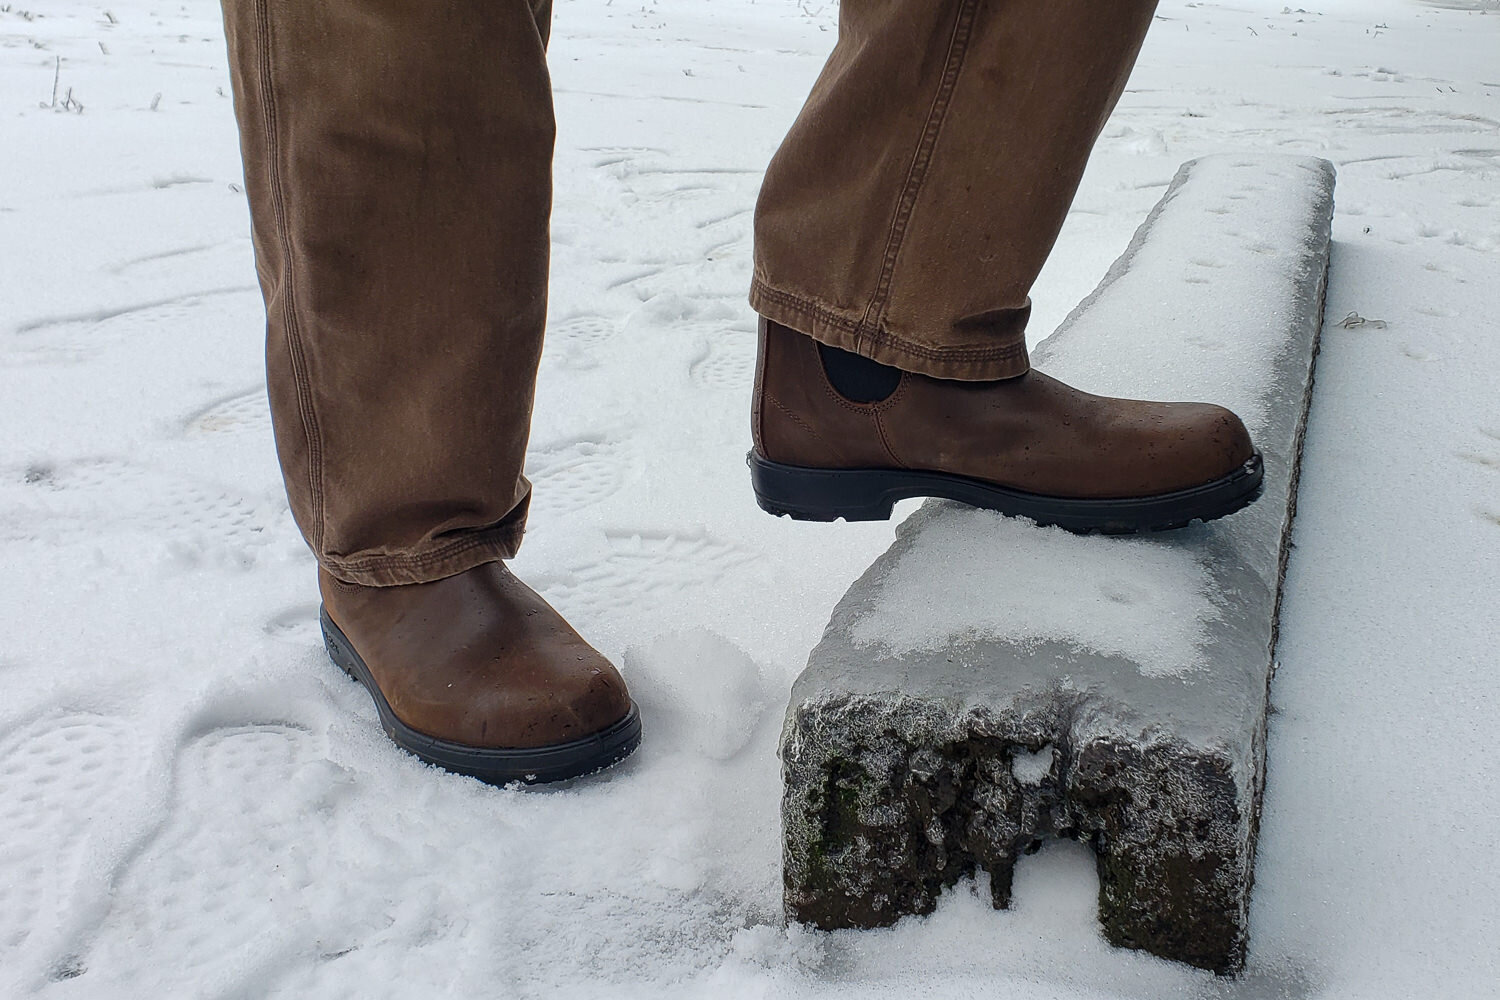 The Blundstone Super 550 Boots are comfortable, stylish, and durable. Plus they can be worn for multiple seasons.